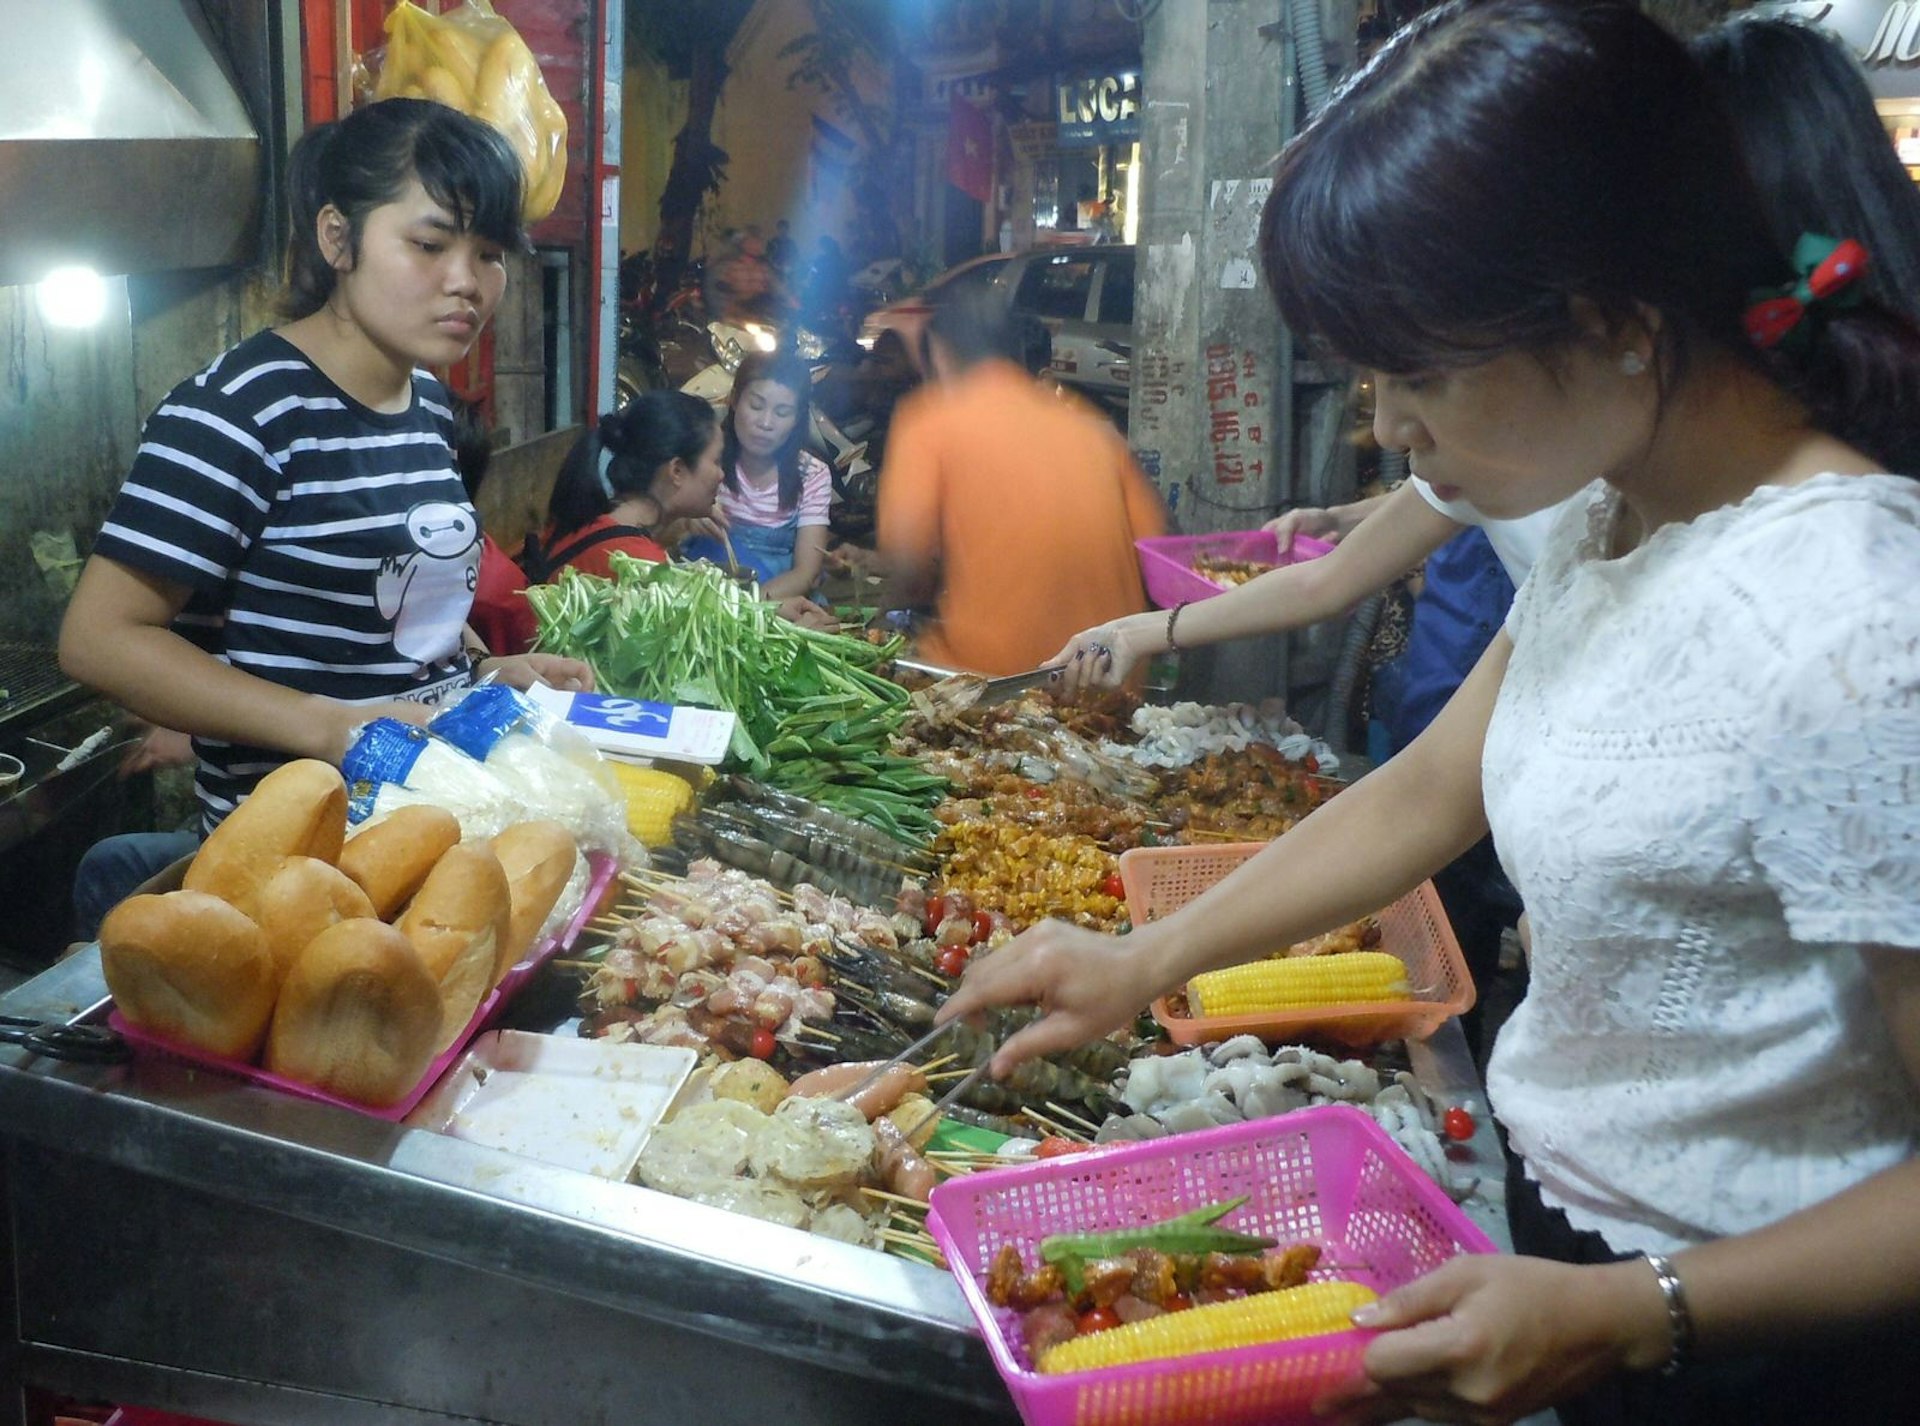 Diners selecting meat and veggies for the barbecue